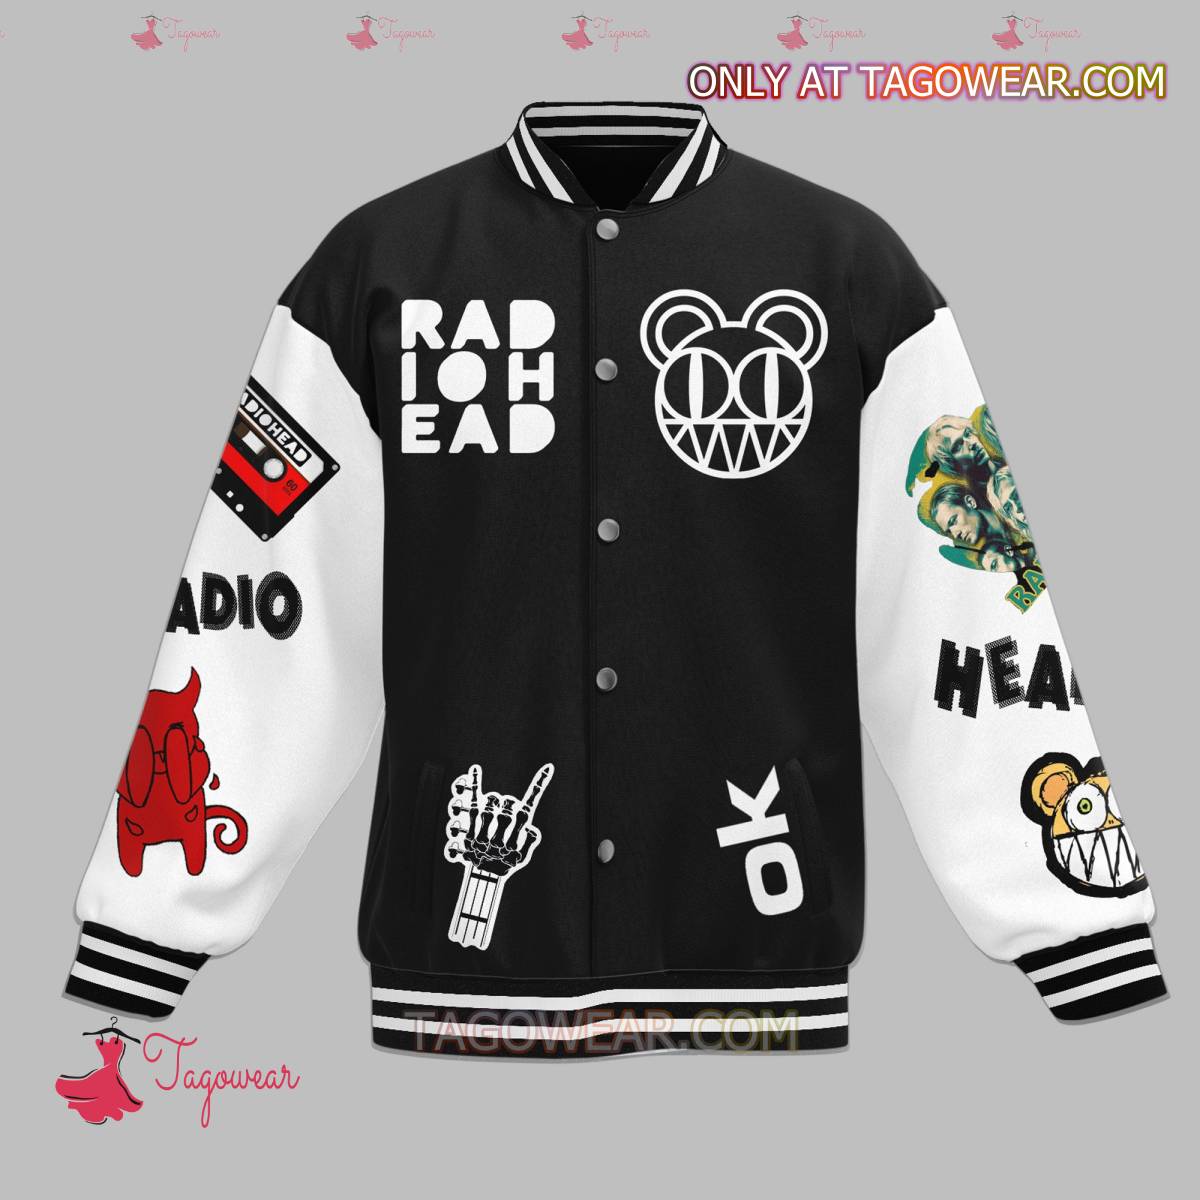 Radiohead-For-A-Minute-There-I-Lost-Myself-Baseball-Jacket a